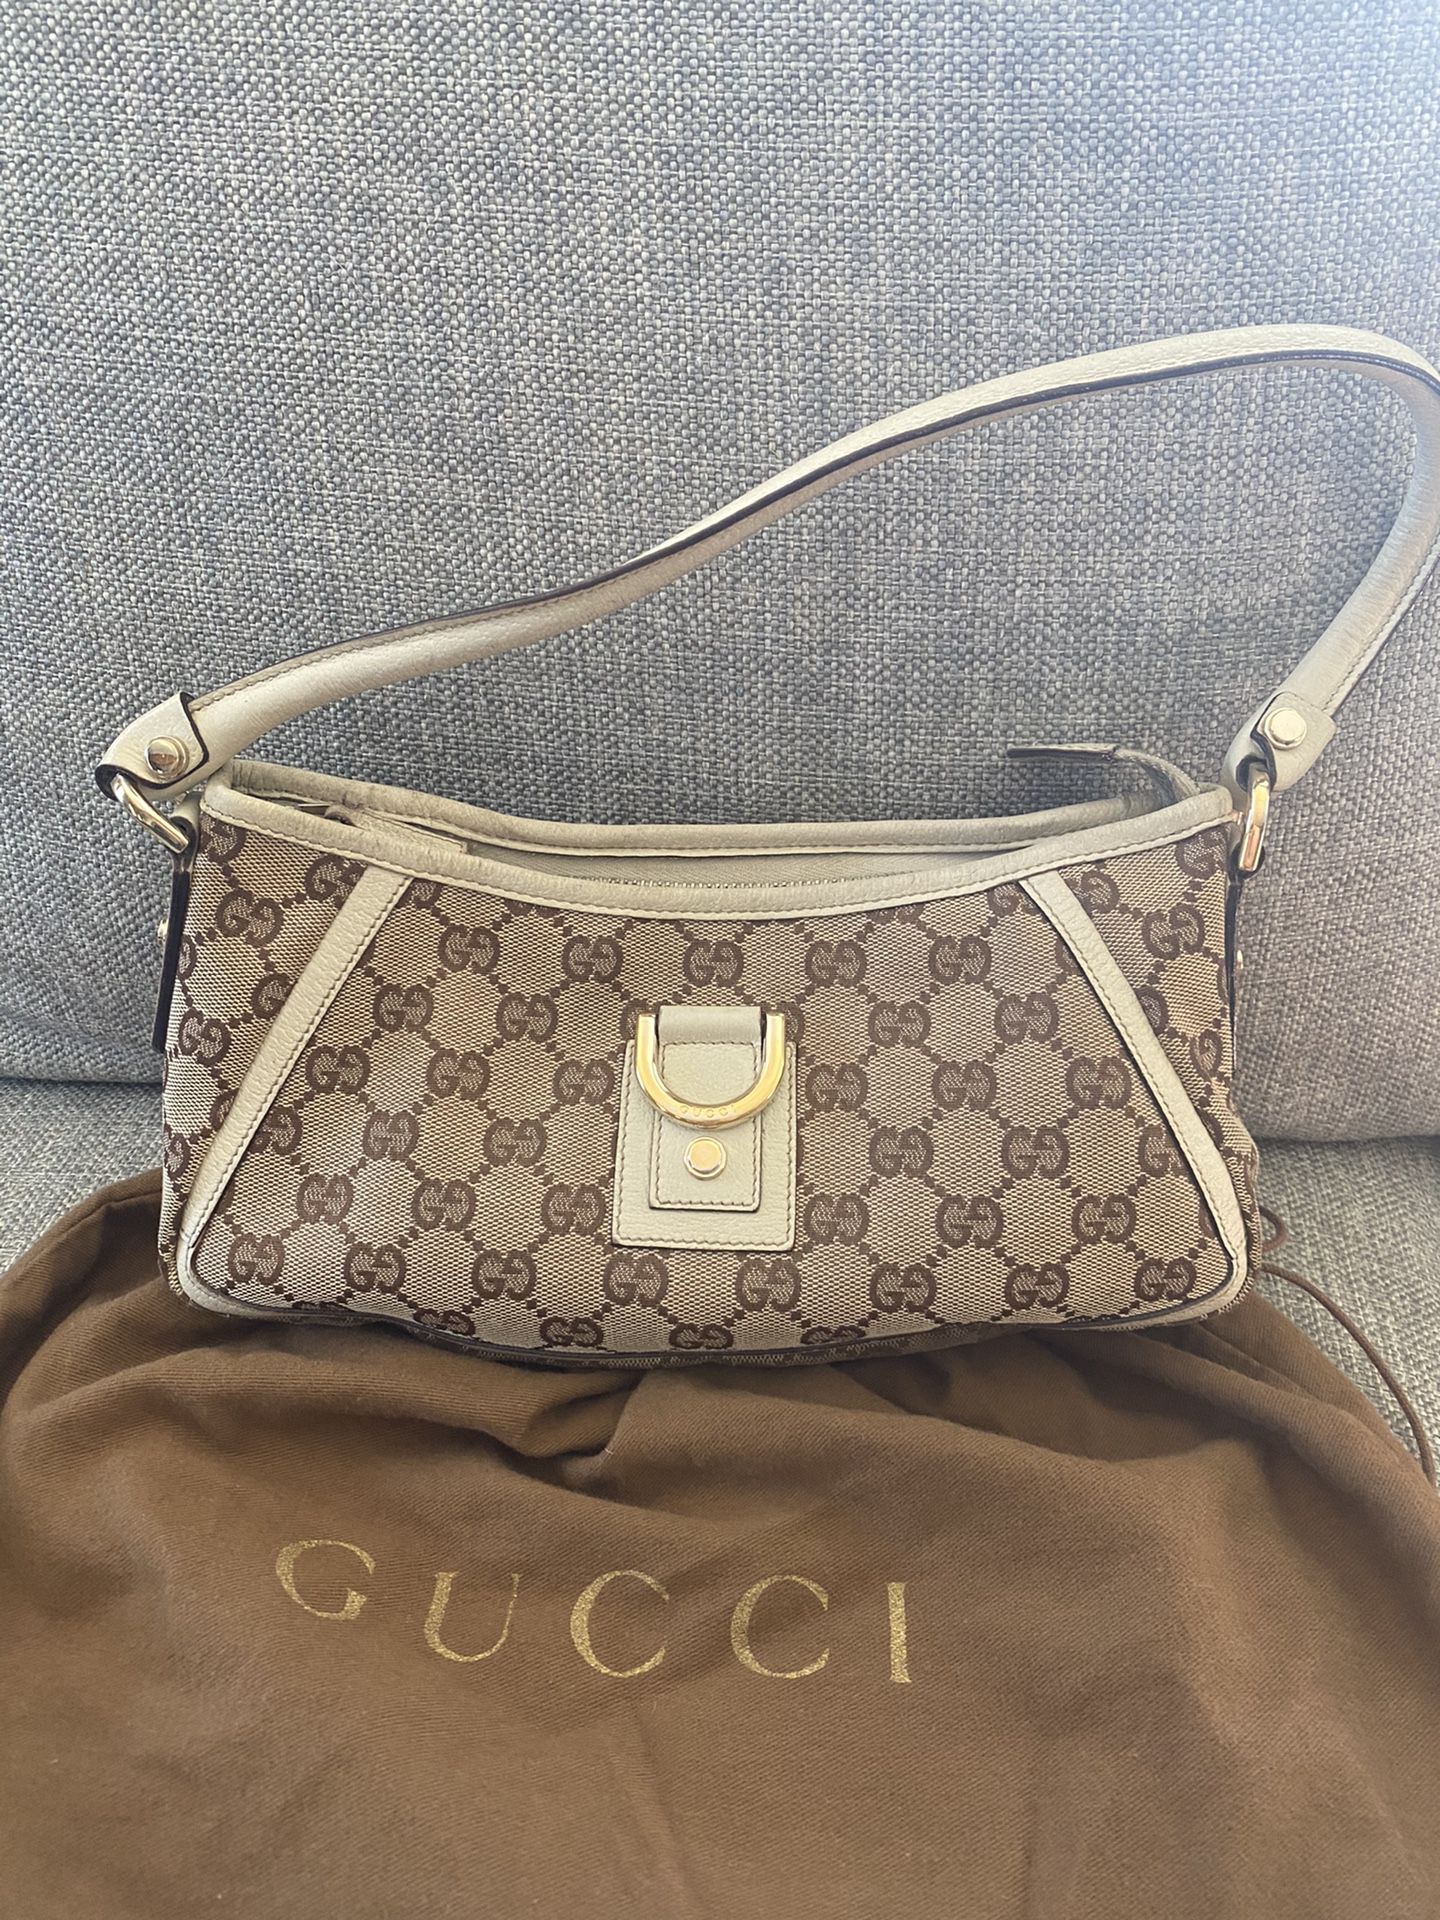 Gucci Bag Mid-Size